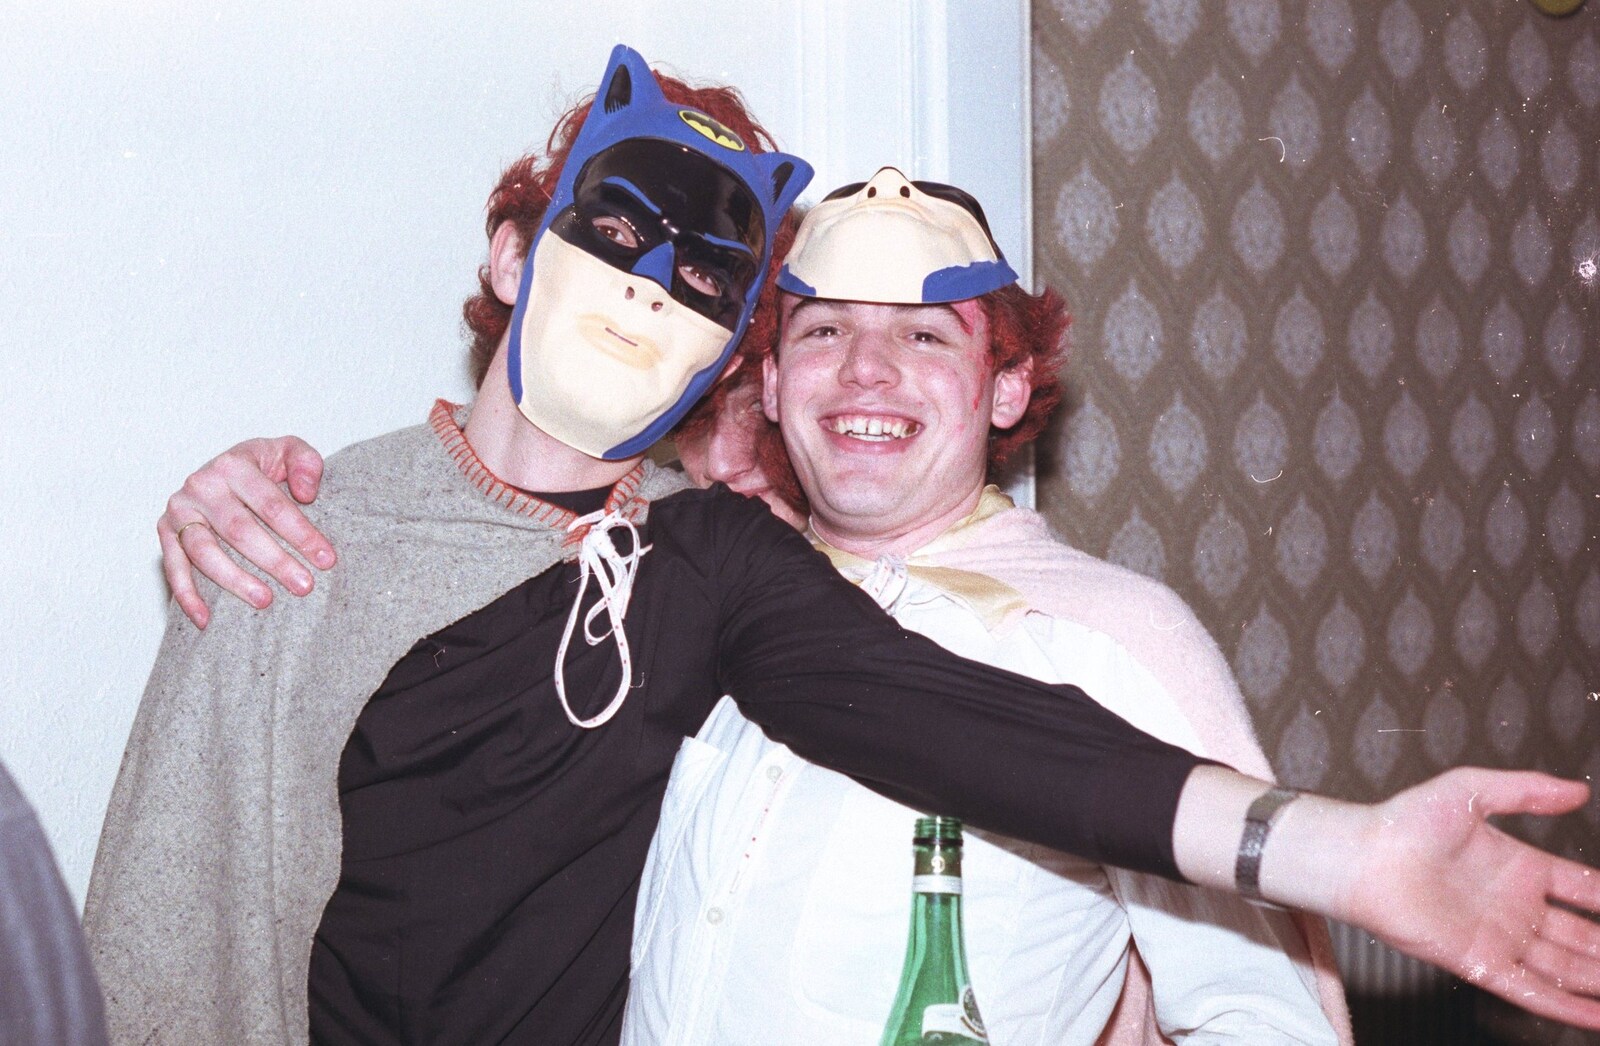 More fancy dress from Uni: Simon Read's Party, North Road East, Plymouth - 10th October 1986